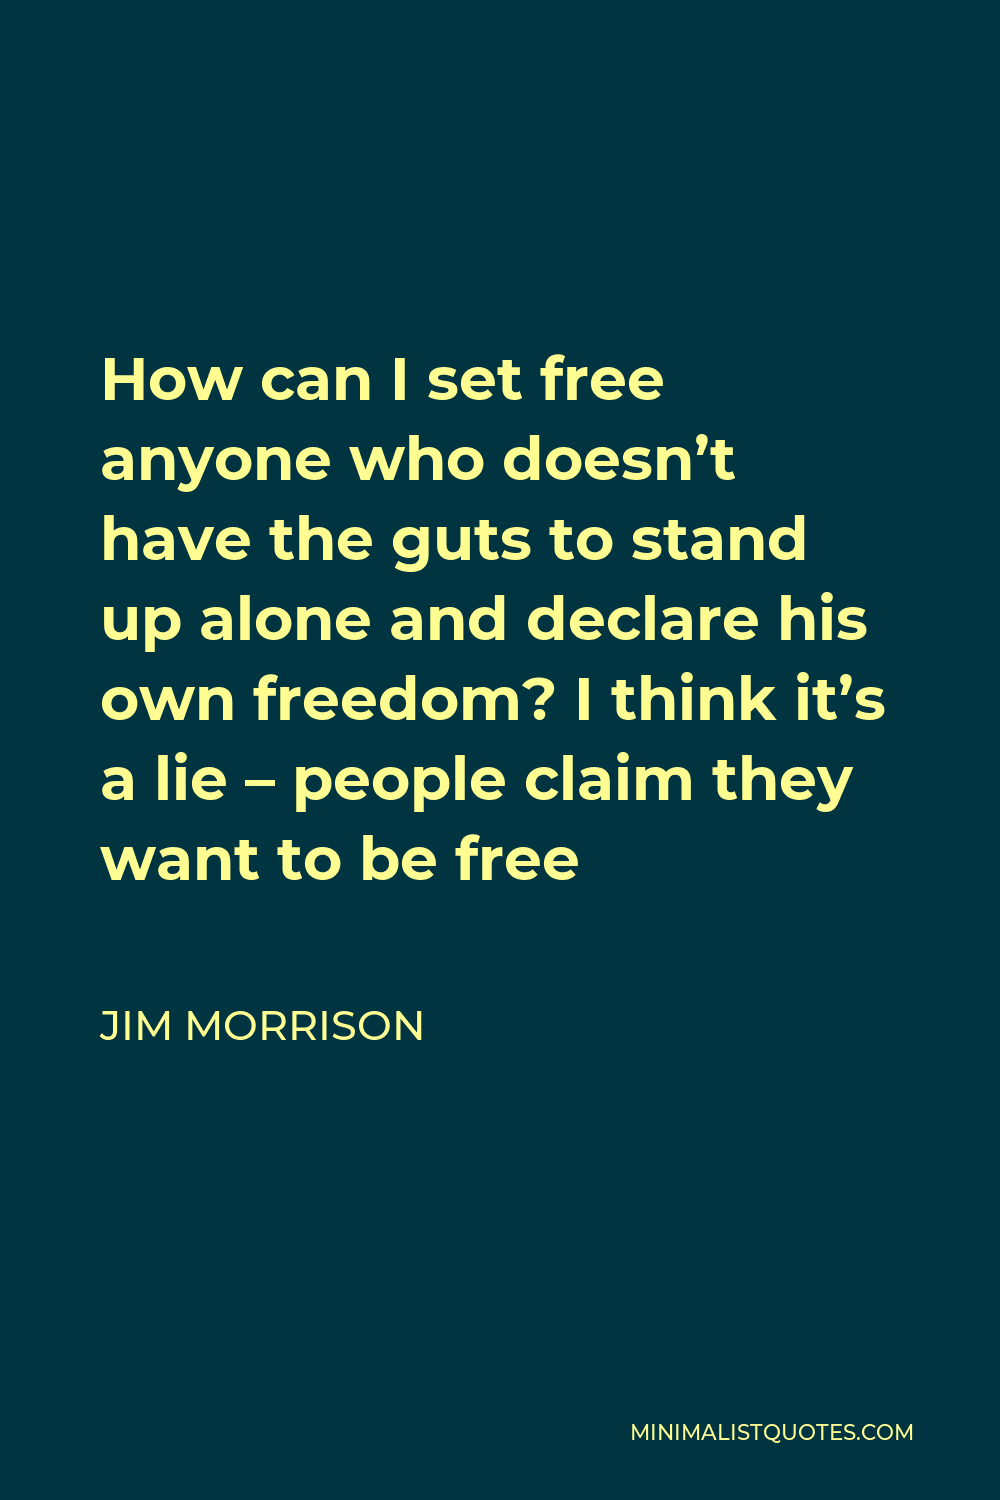 Jim Morrison Quote - How can I set free anyone who doesn’t have the guts to stand up alone and declare his own freedom? I think it’s a lie – people claim they want to be free